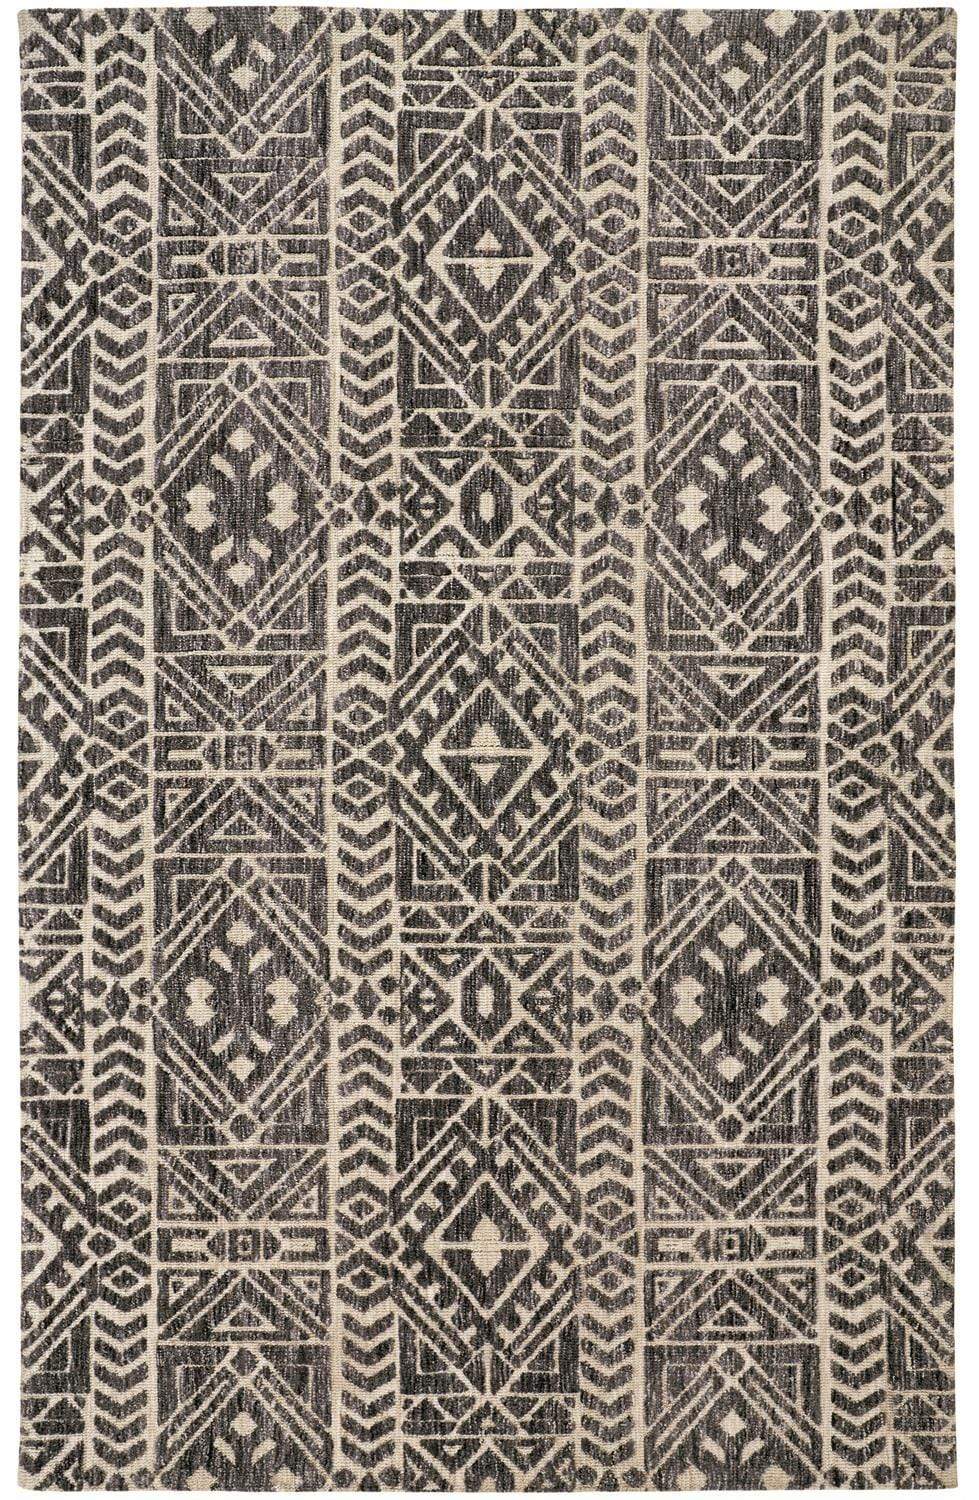 Feizy Feizy Colton Modern Mid-century Tribal Rug - Steel Gray & Ivory - Available in 5 Sizes 3'-6" x 5'-6" 8748627FSLT000C50